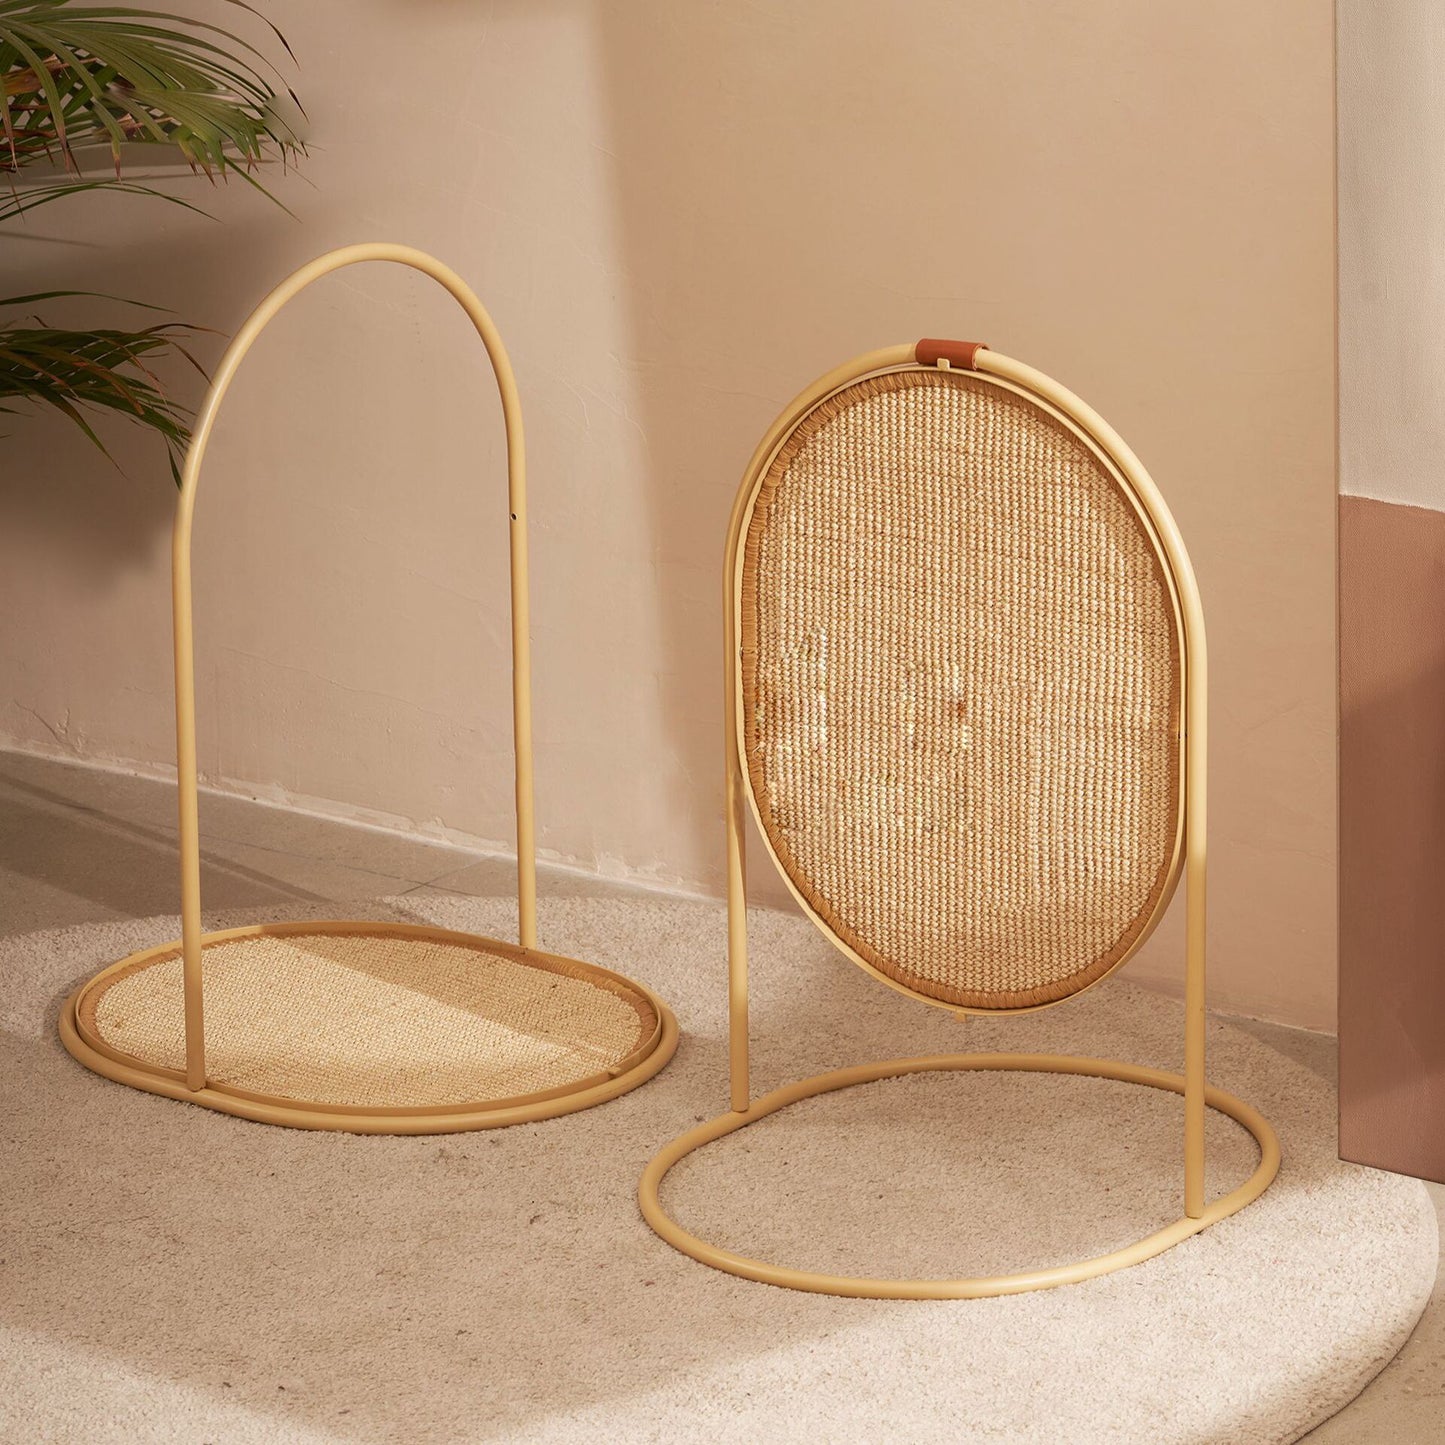 LINA - side table/scratcher